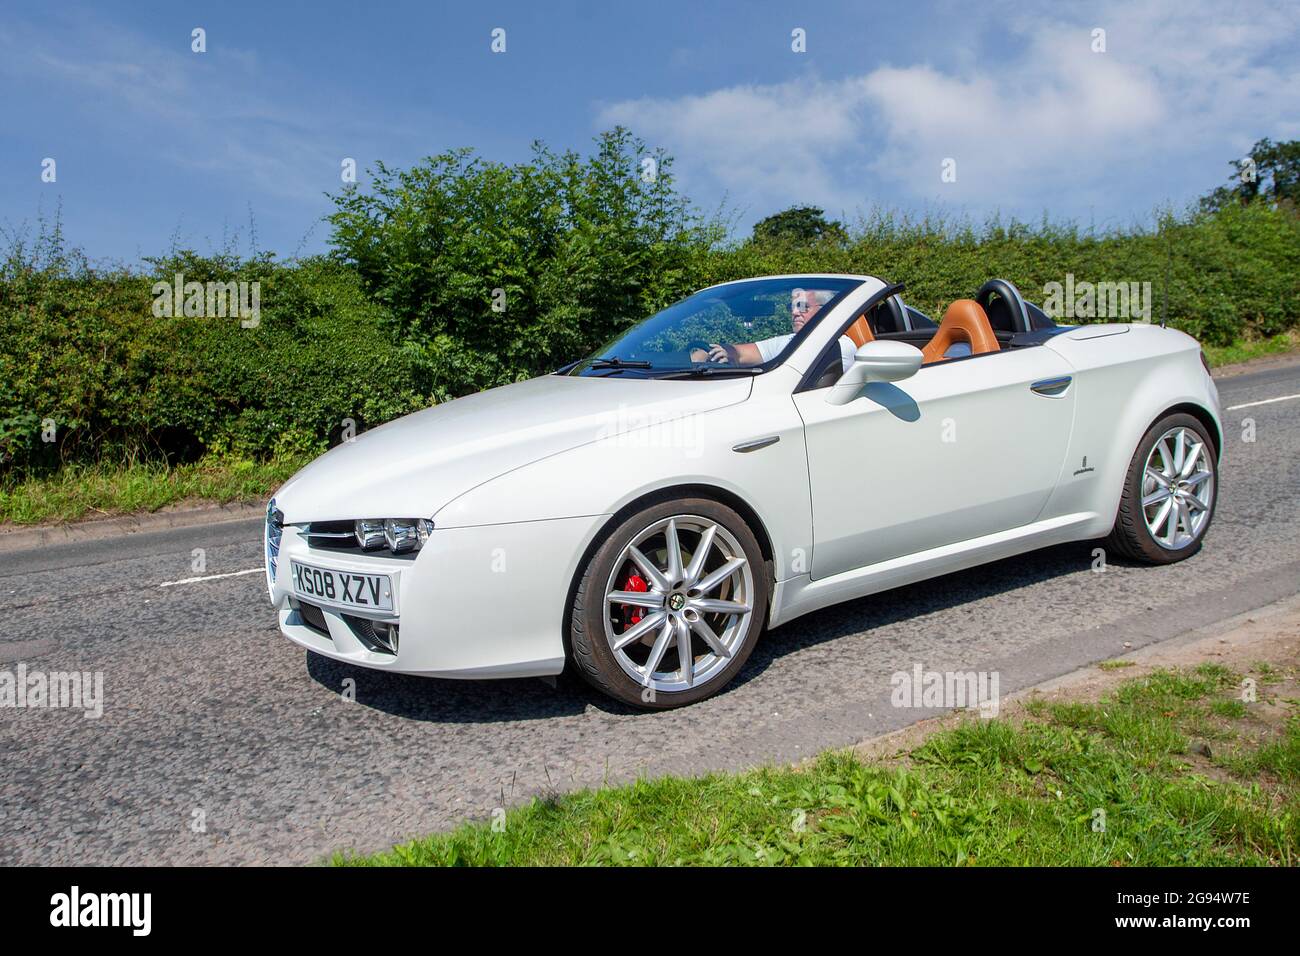 2008 white Alfa Romeo Spider Jts Le 2198cc Italian roadster cabrio en-route to Capesthorne Hall classic July car show, Cheshire, UK Stock Photo